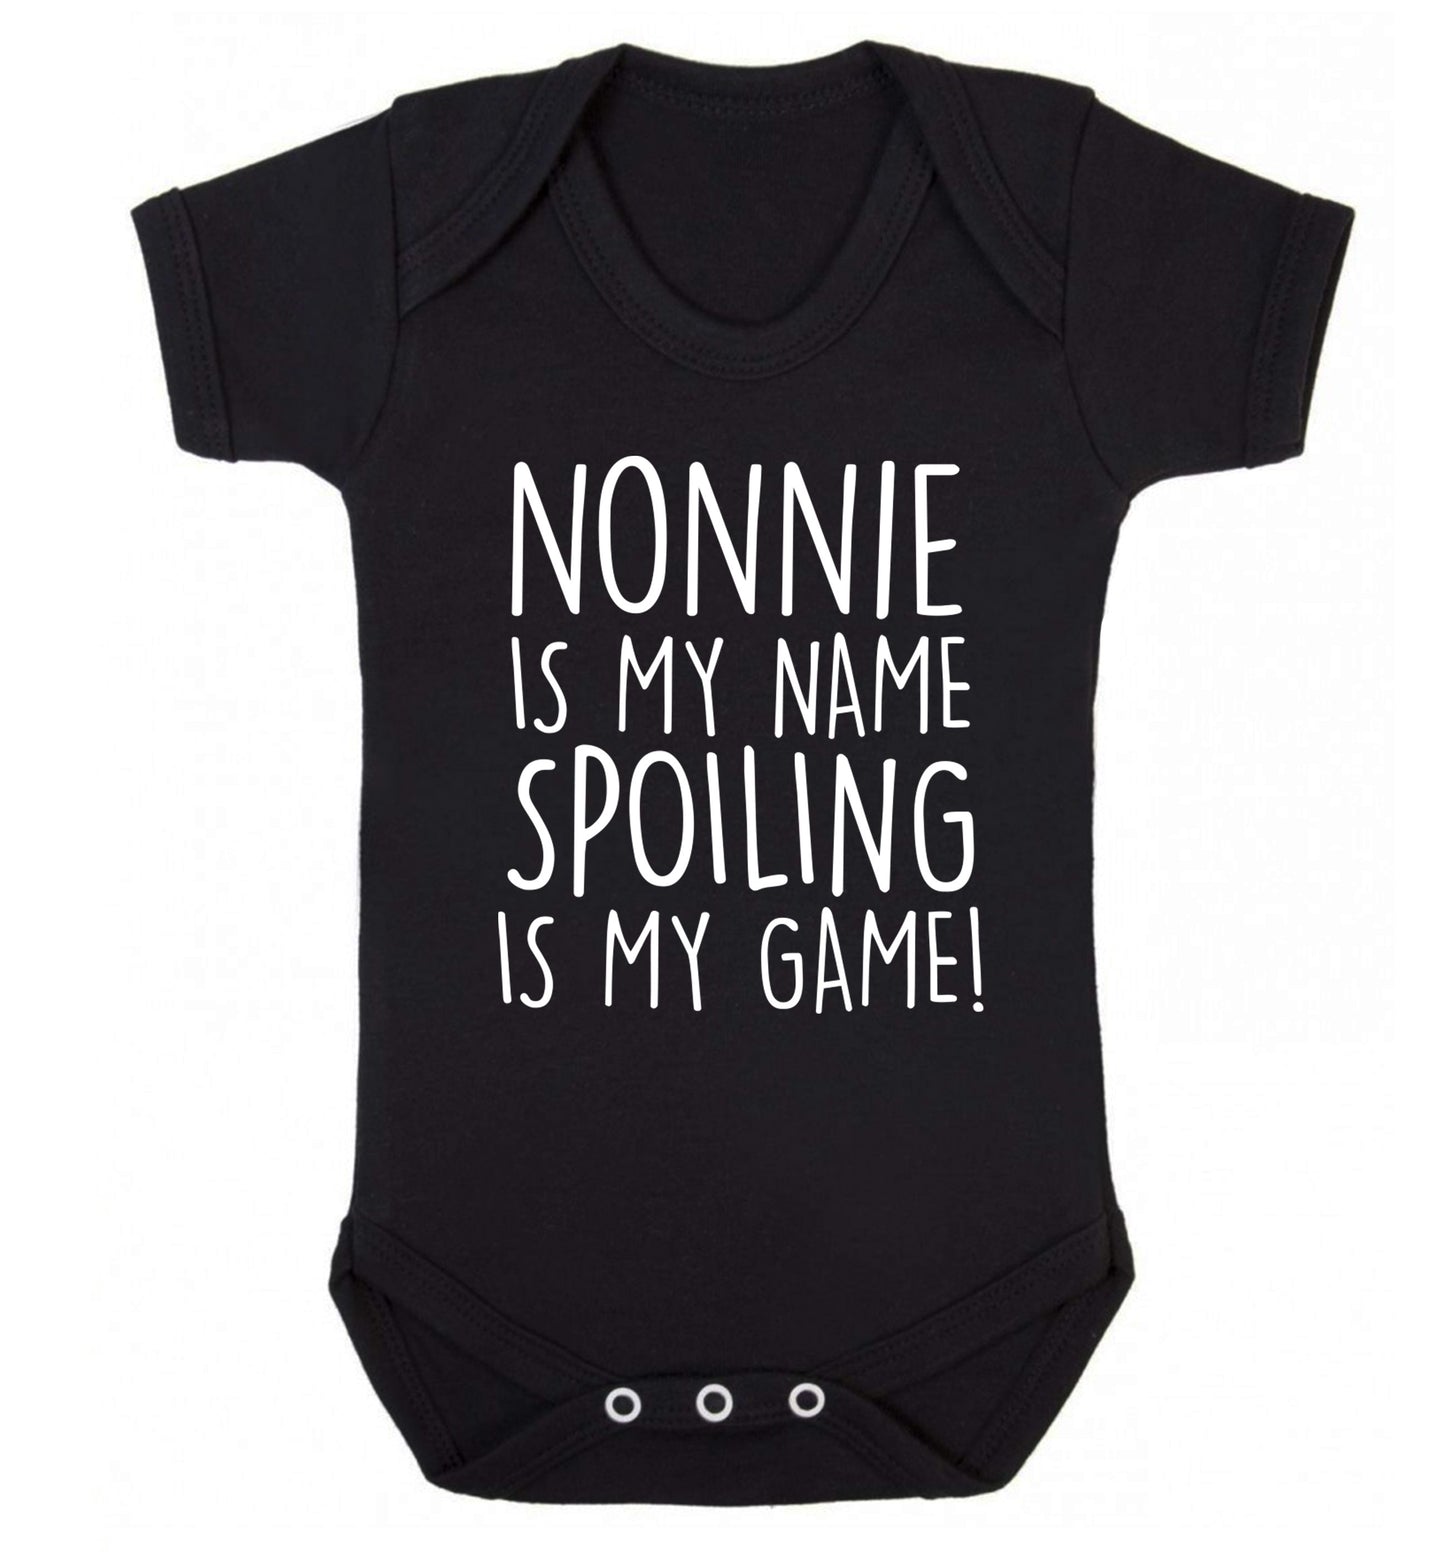 Nonnie is my name, spoiling is my game Baby Vest black 18-24 months